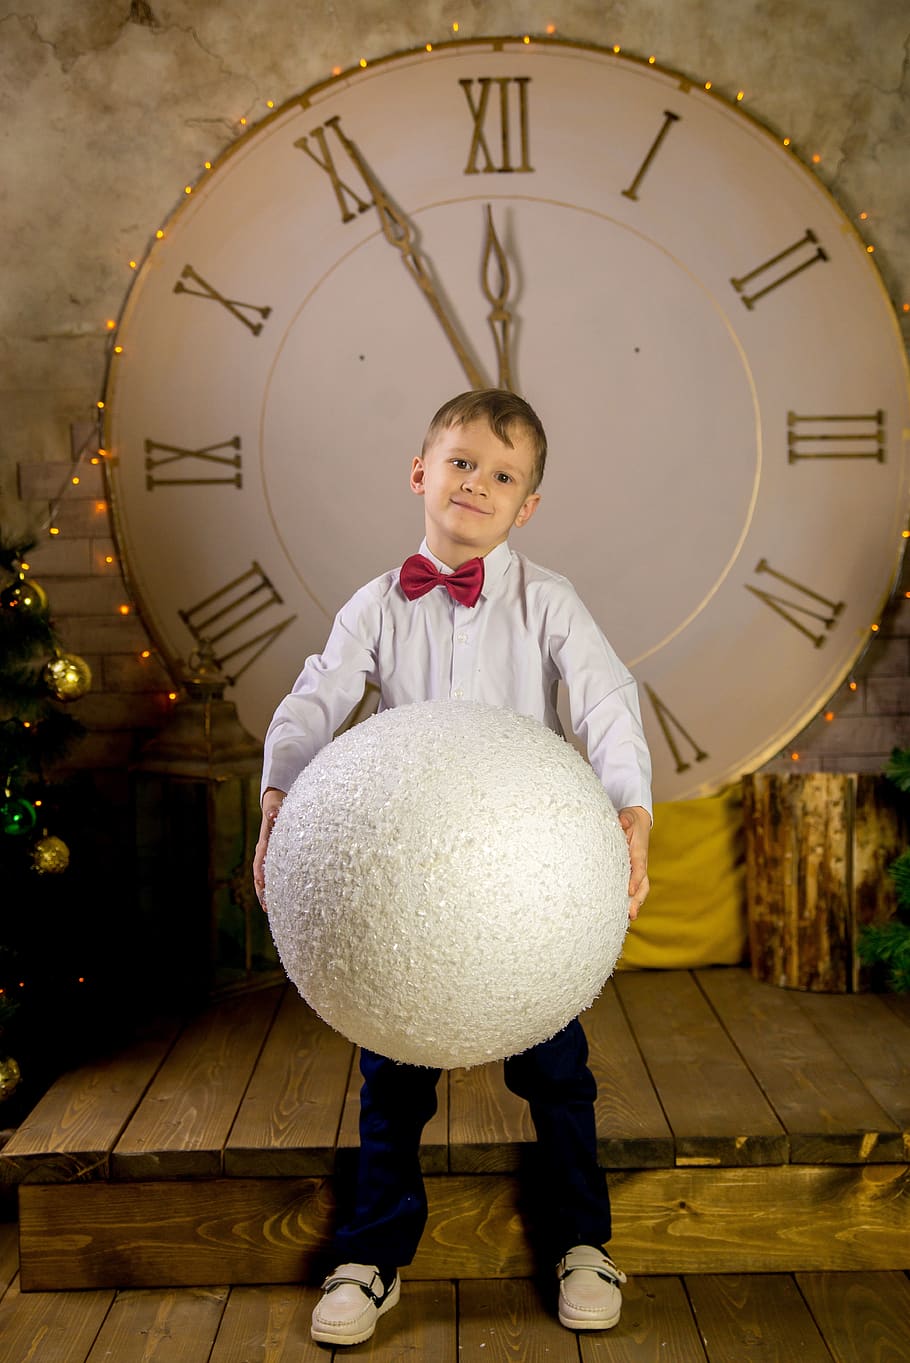 new year's eve, new age, holiday, boy, clock, chime, the festive mood, smile, baby, schoolboy